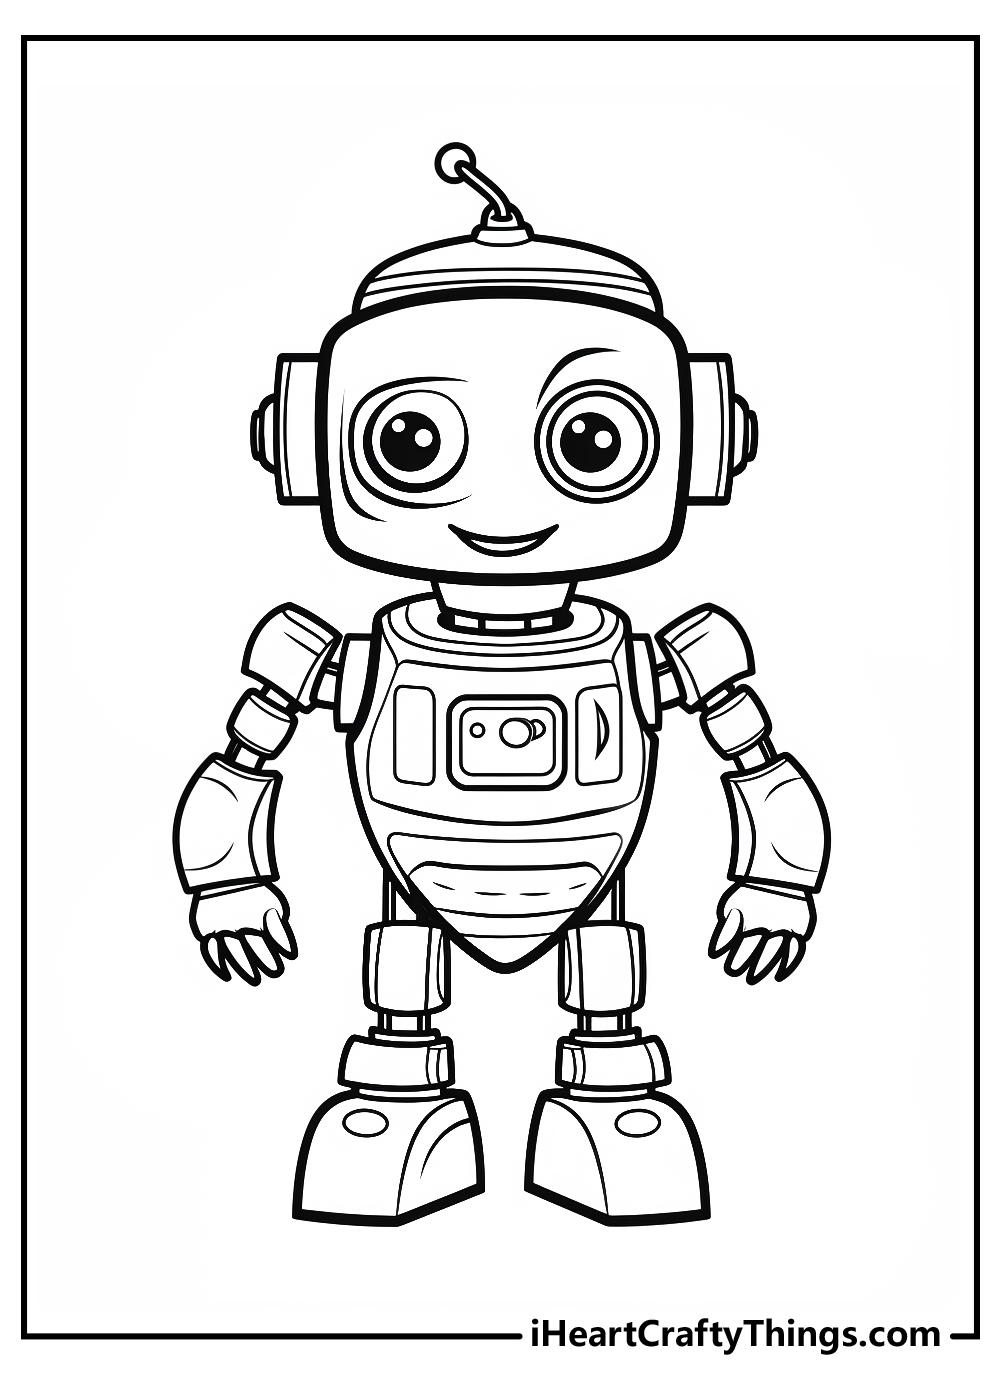 https://iheartcraftythings.com/wp-content/uploads/2022/04/Robot-Coloring-Pages4.jpg